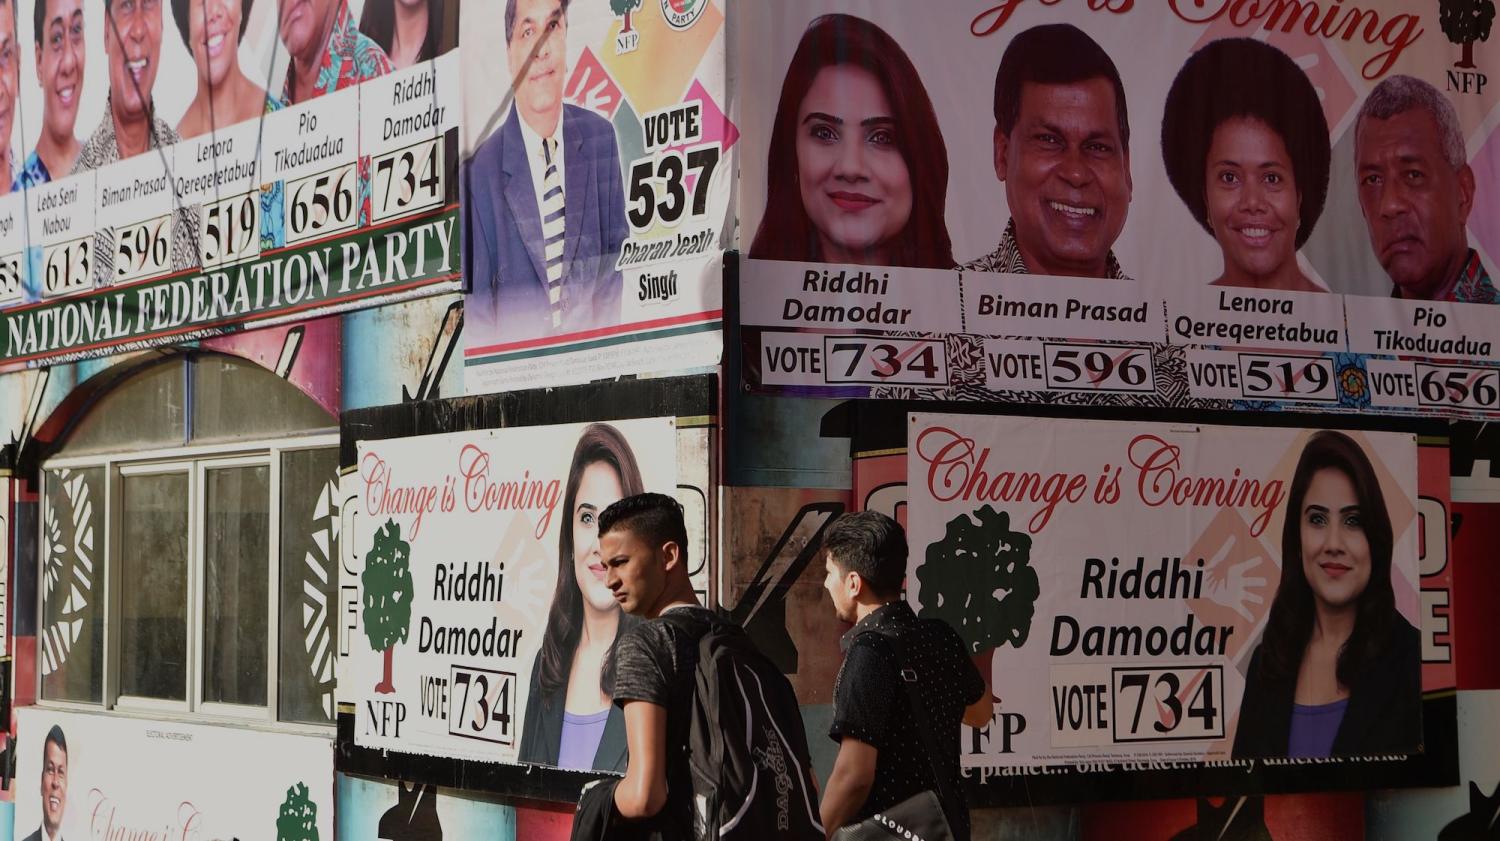 Election posters in the Fijian capital of Suva (Photo: Peter Parks via Getty)